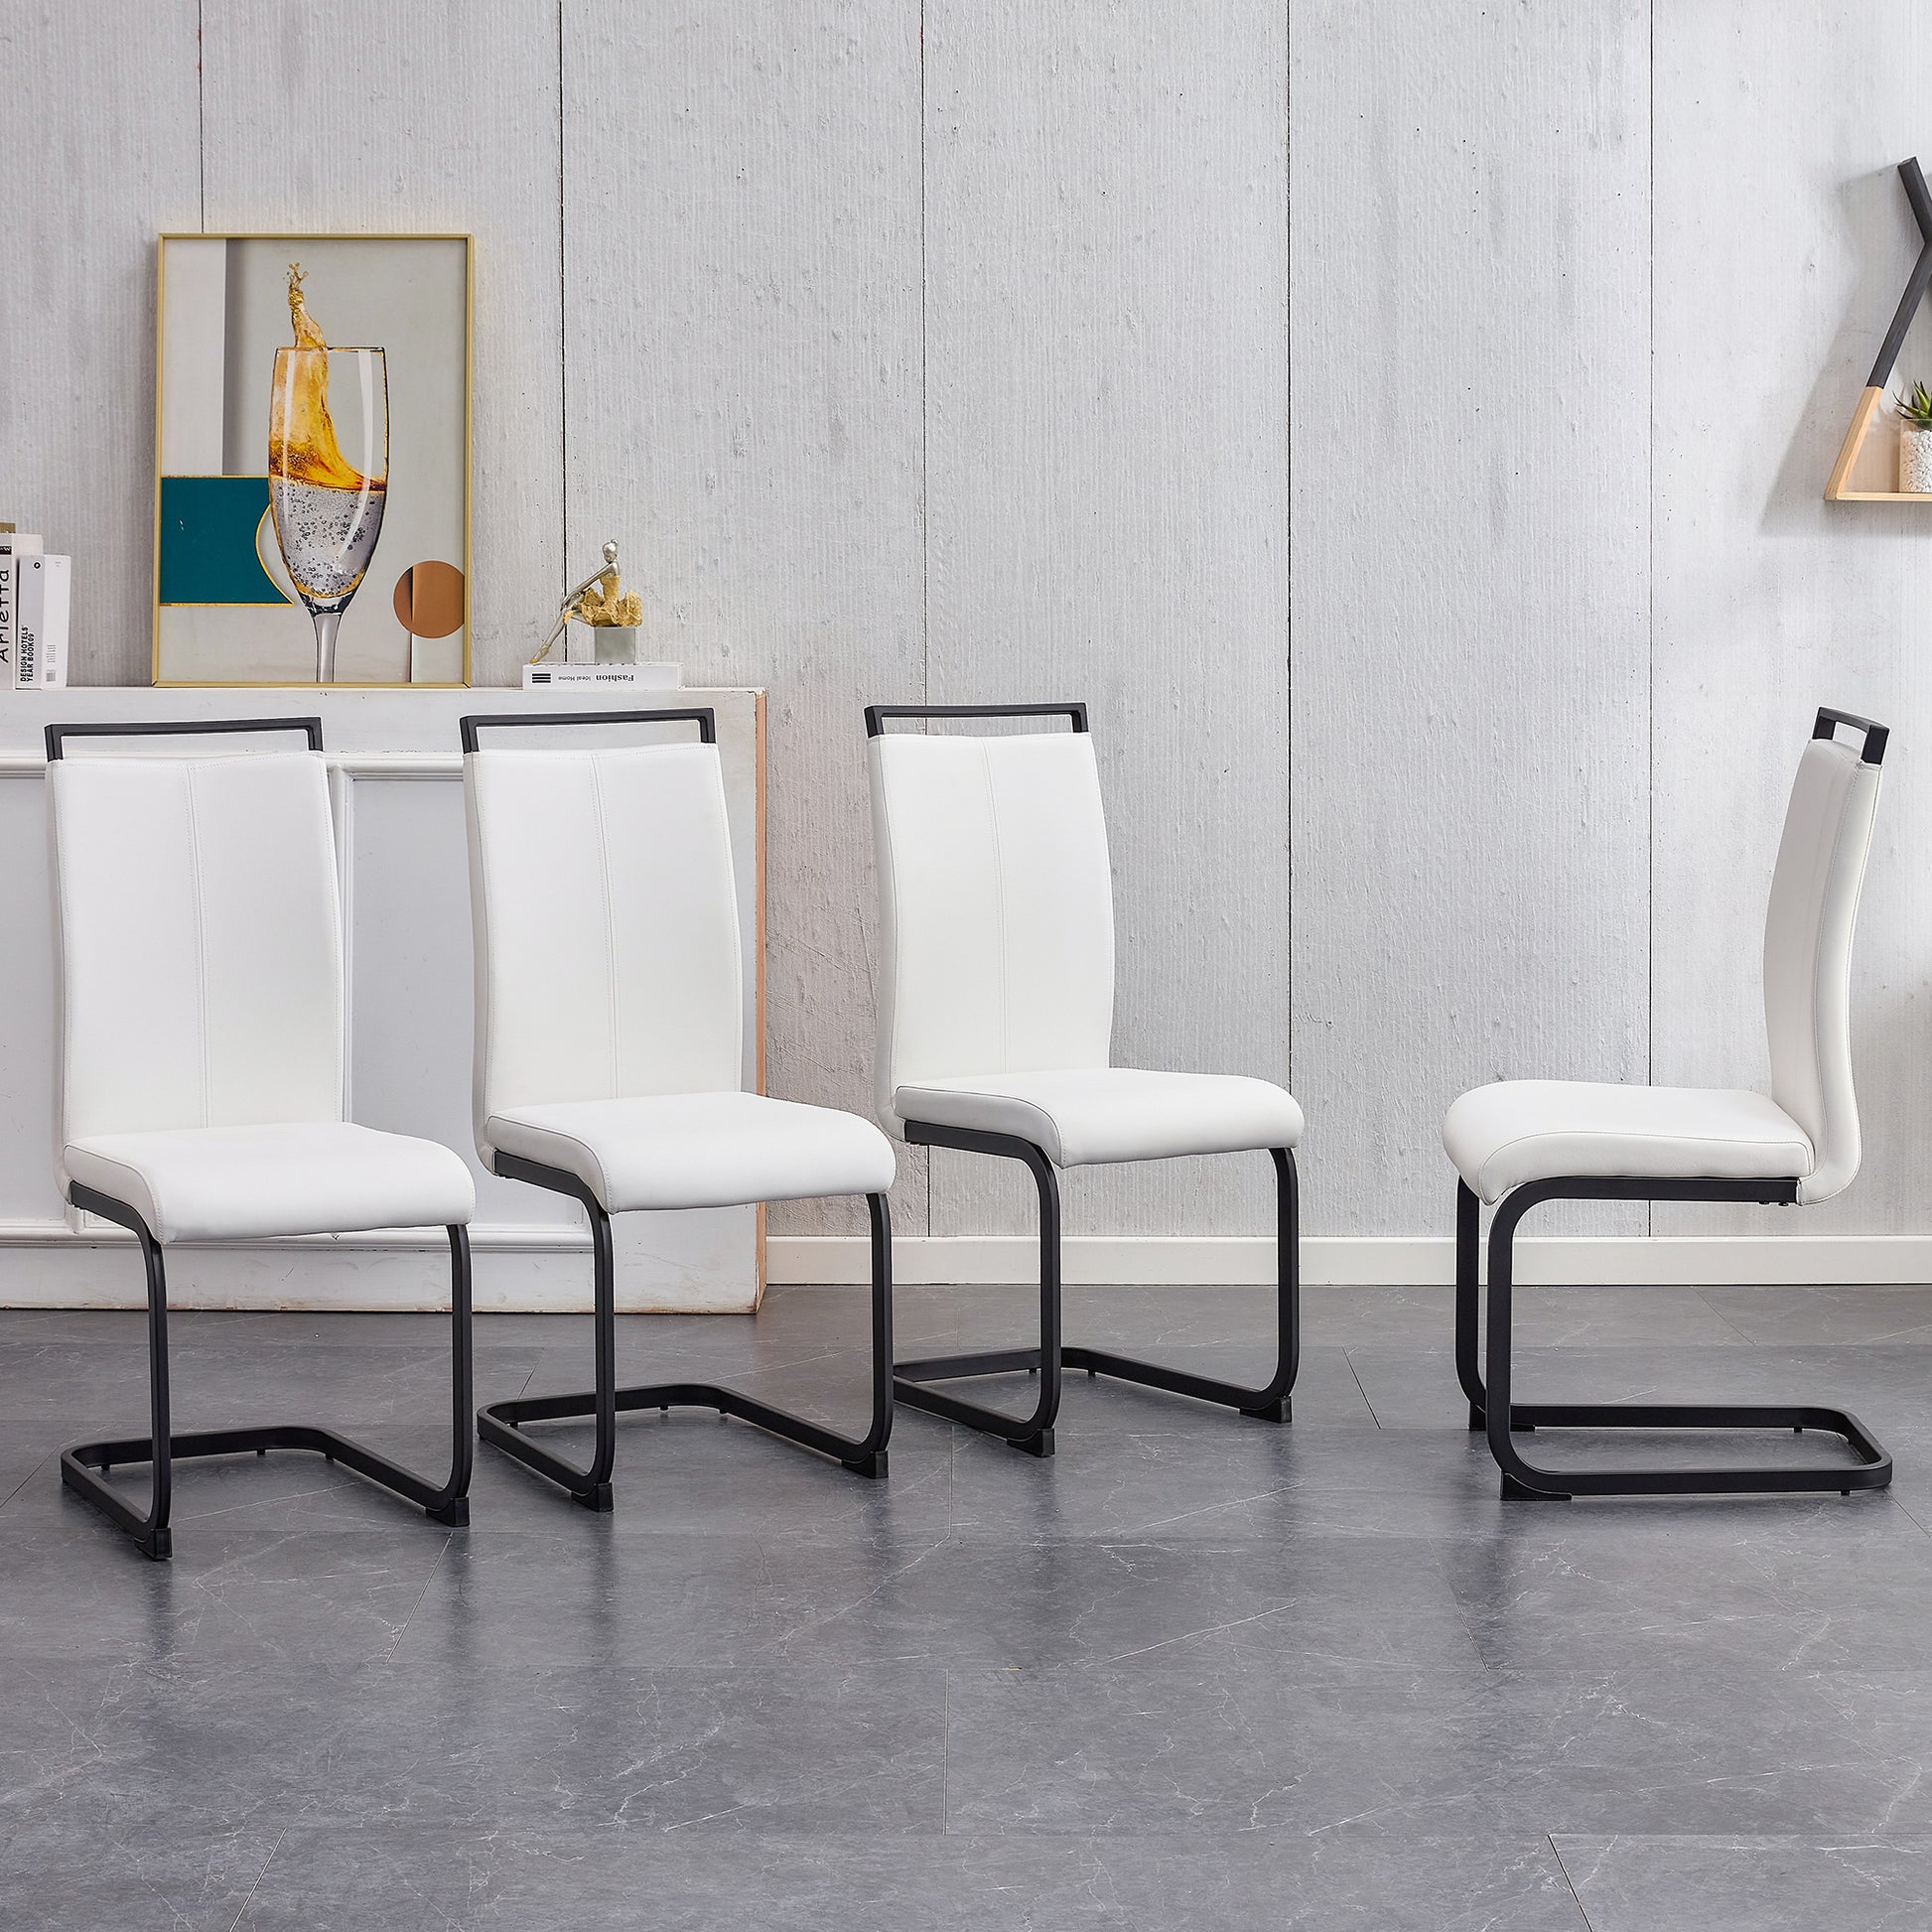 Table and chair set, 1 table with 4 white chairs. 0.4 "tempered glass desktop and black MDF, PU artificial leather high backrest cushion side chair, C-shaped tube black coated metal legs. - Enova Luxe Home Store